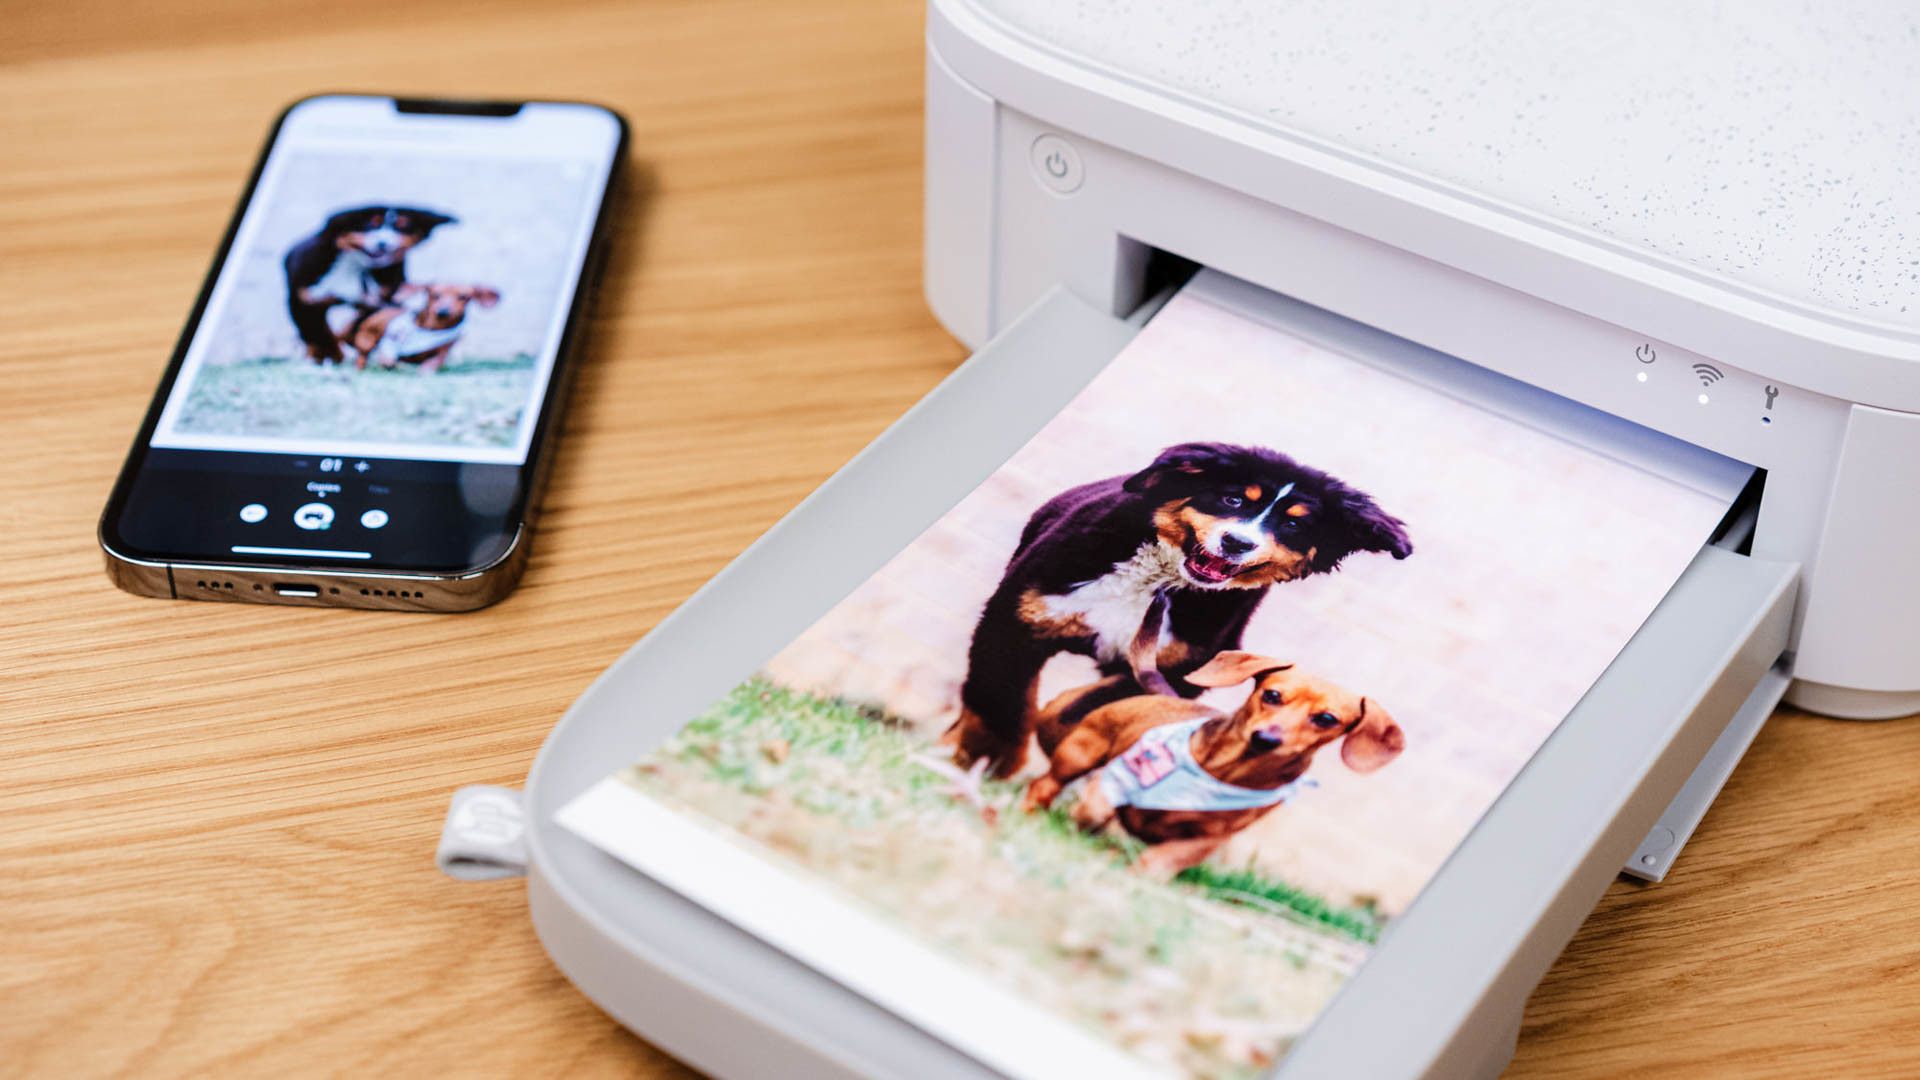 HP Sprocket Plus Photo Printer with printed images of puppies